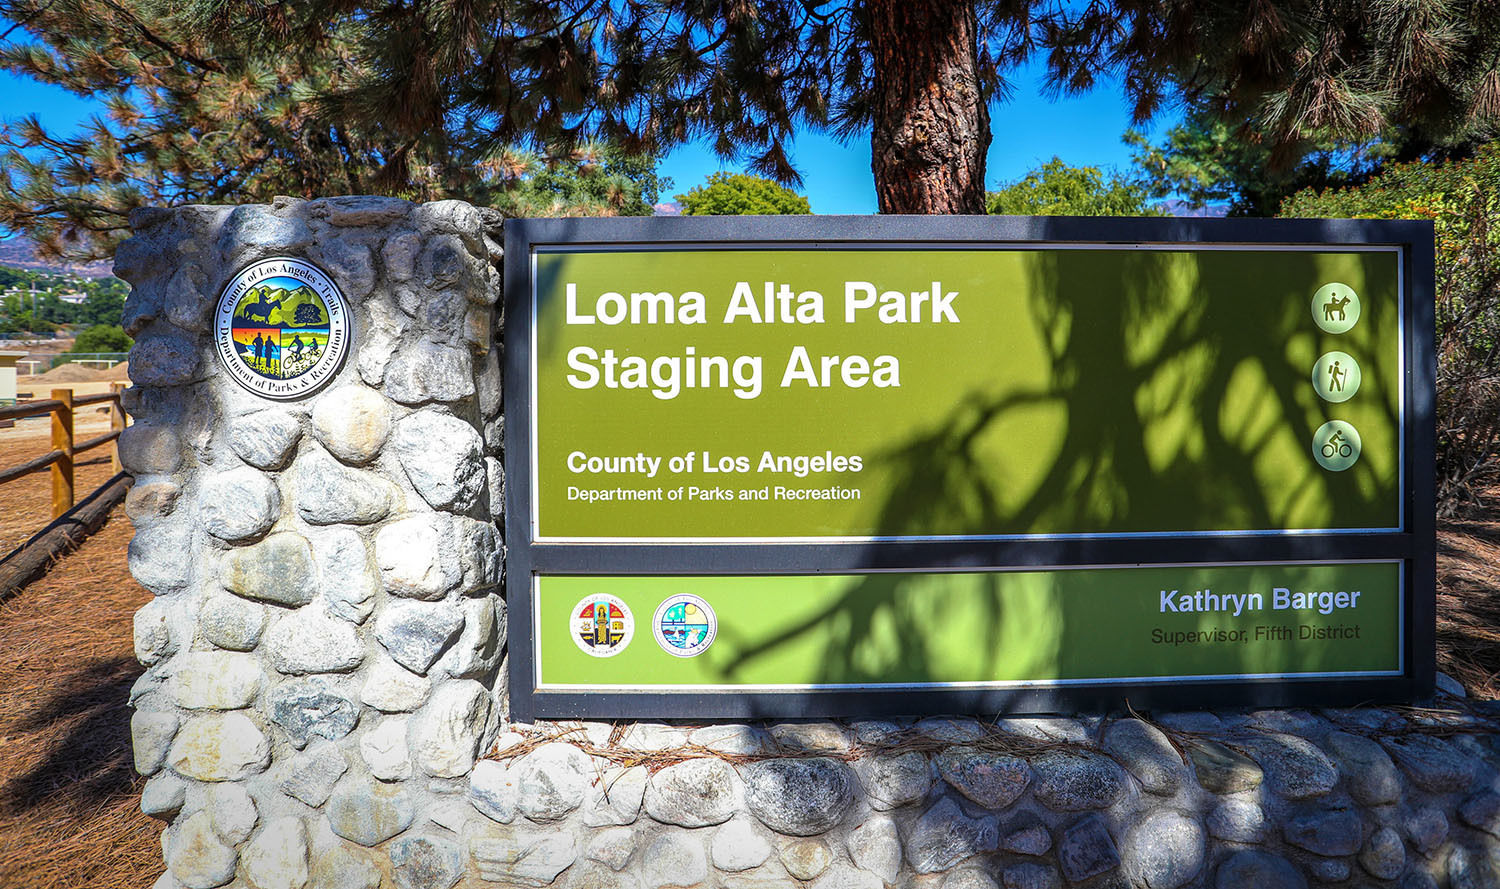 Loma_Alta_Park_Staging_Area_small.jpg